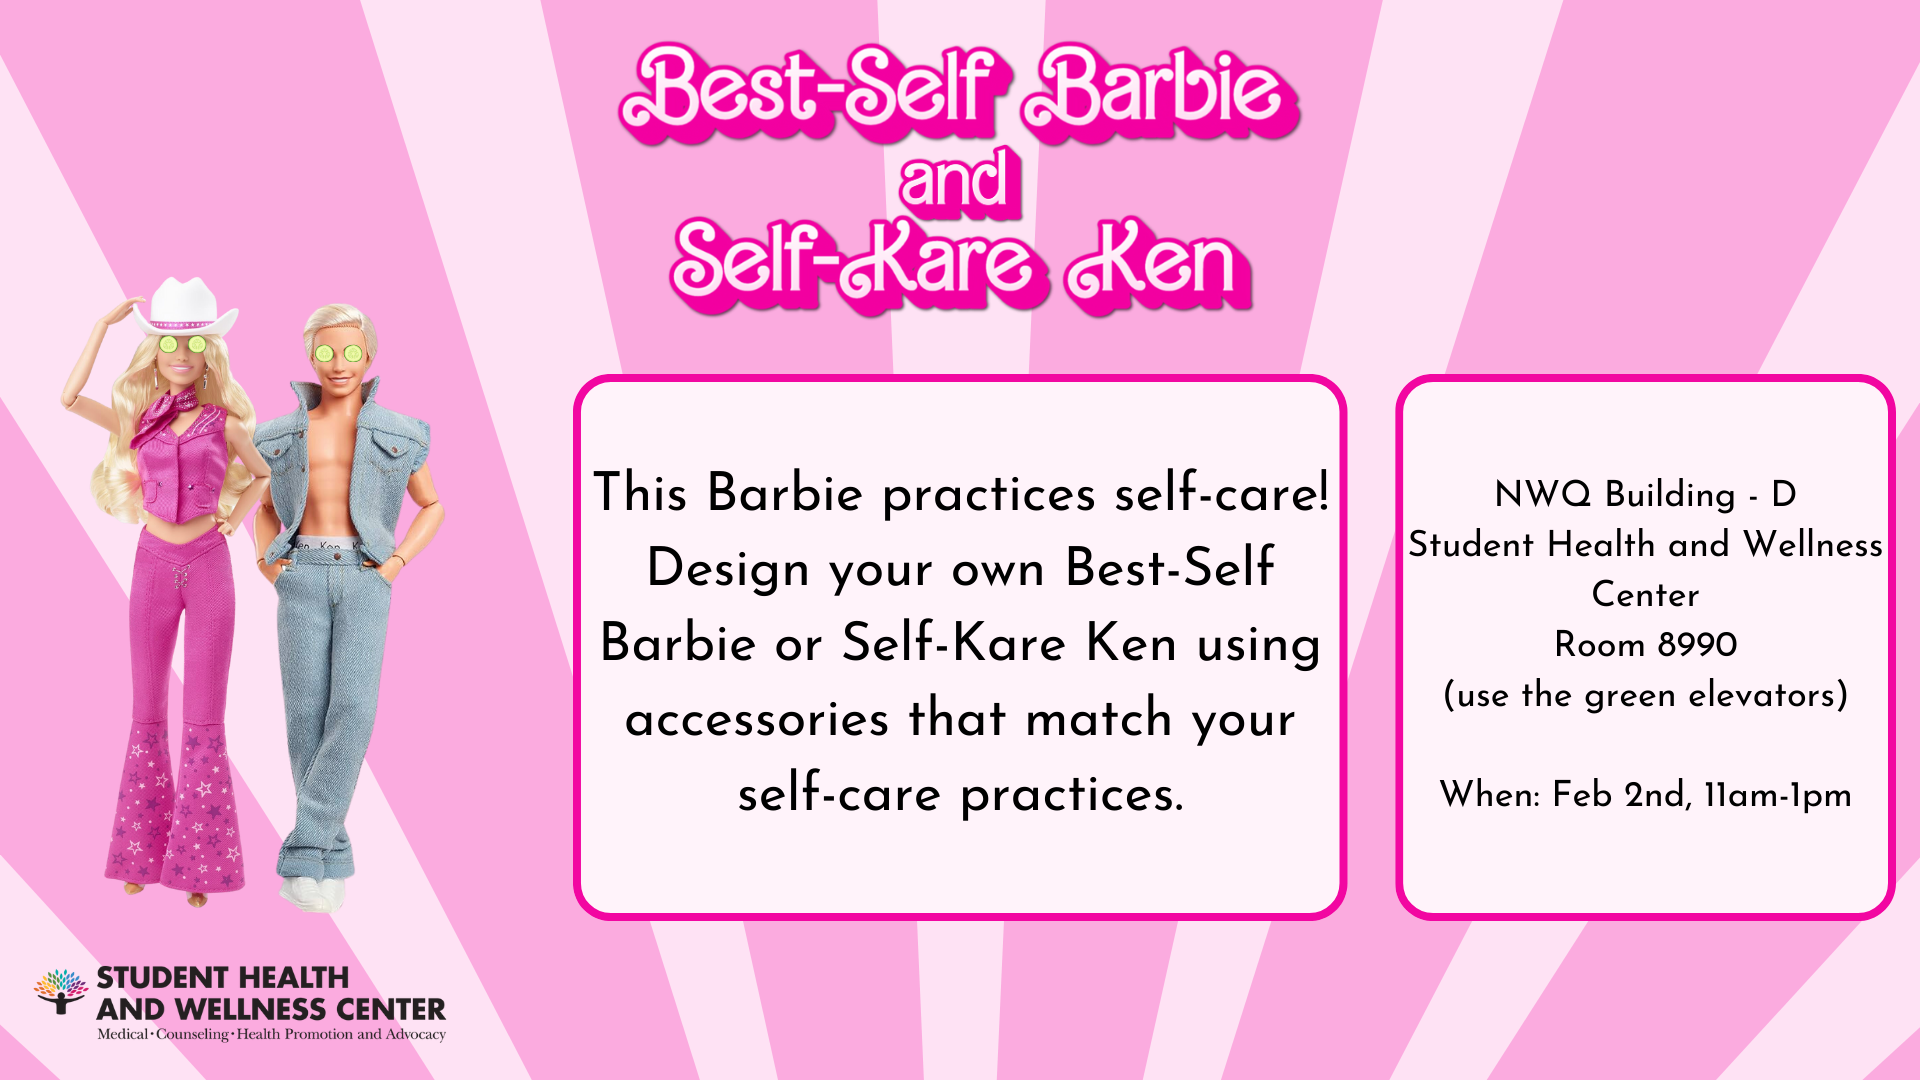 A flyer for a barbie themed self-care event